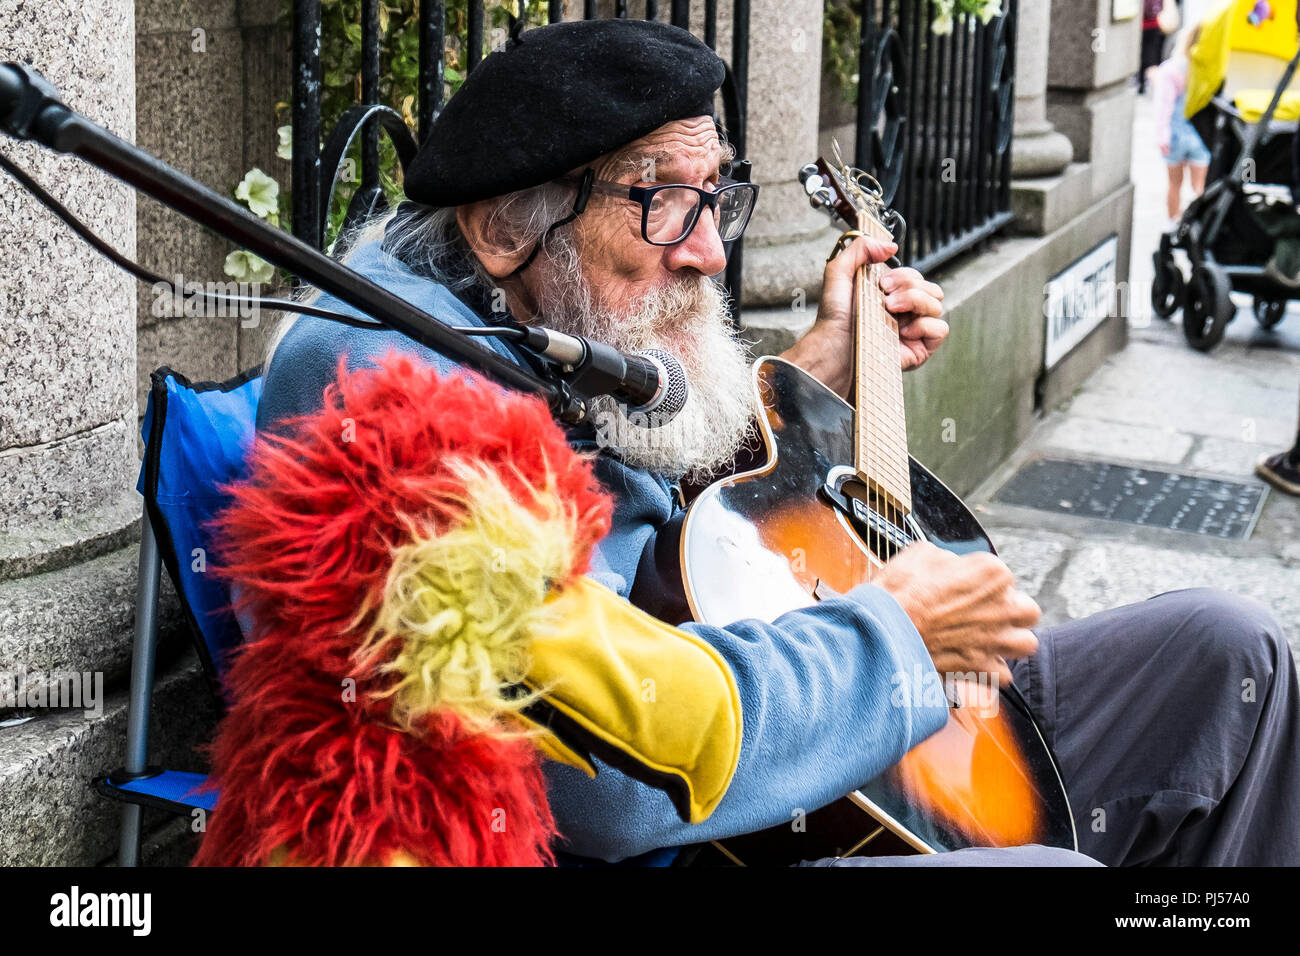 A mature busker playing the guitar and singing in a street in Truro Cornwall. Stock Photo